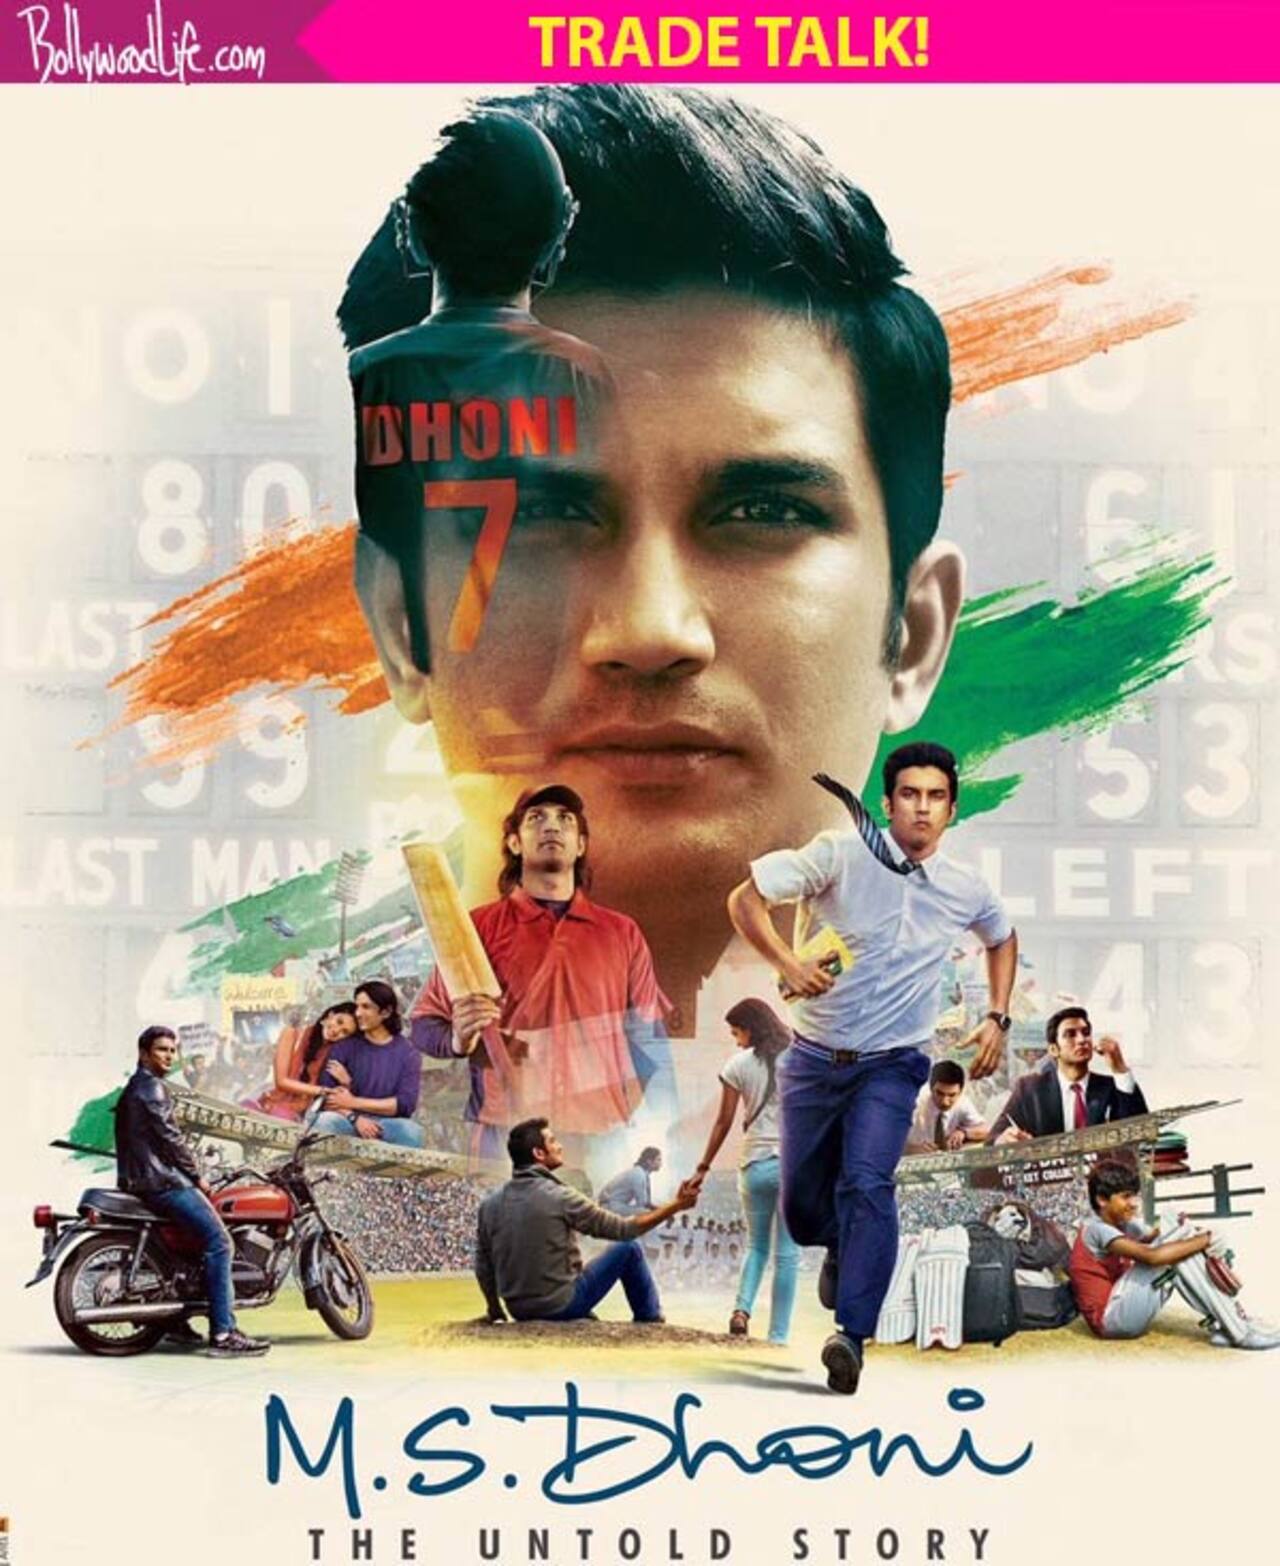 Not Sushant Singh Rajput, here's why M.S. Dhoni: The Untold Story is a box office BLOCKBUSTER!